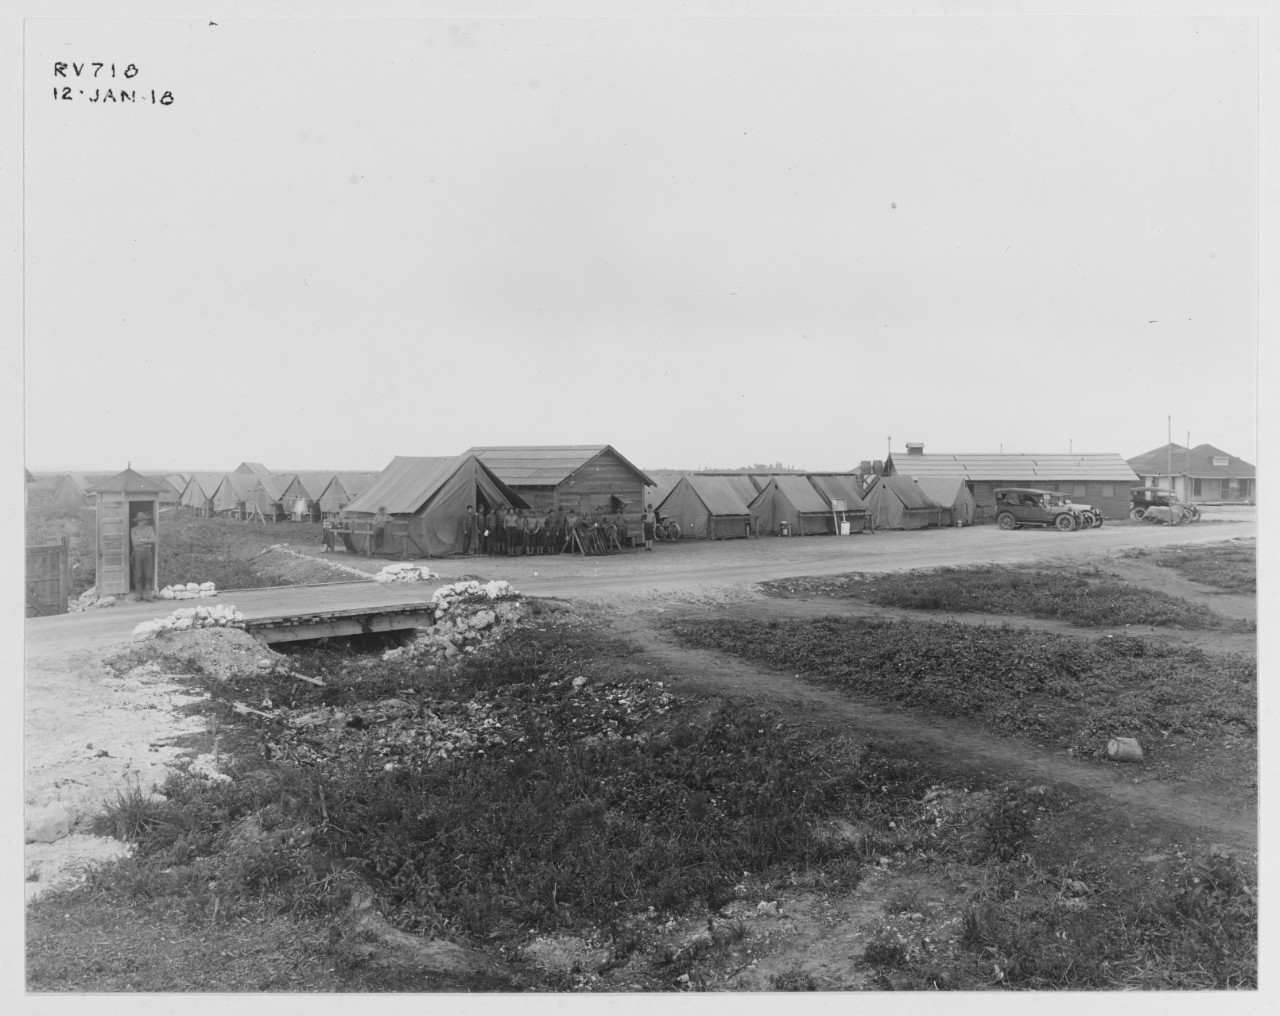 Grand Tent Brig and quarters for the guard, U.S. Marine Flying Field, Miami, Florida.